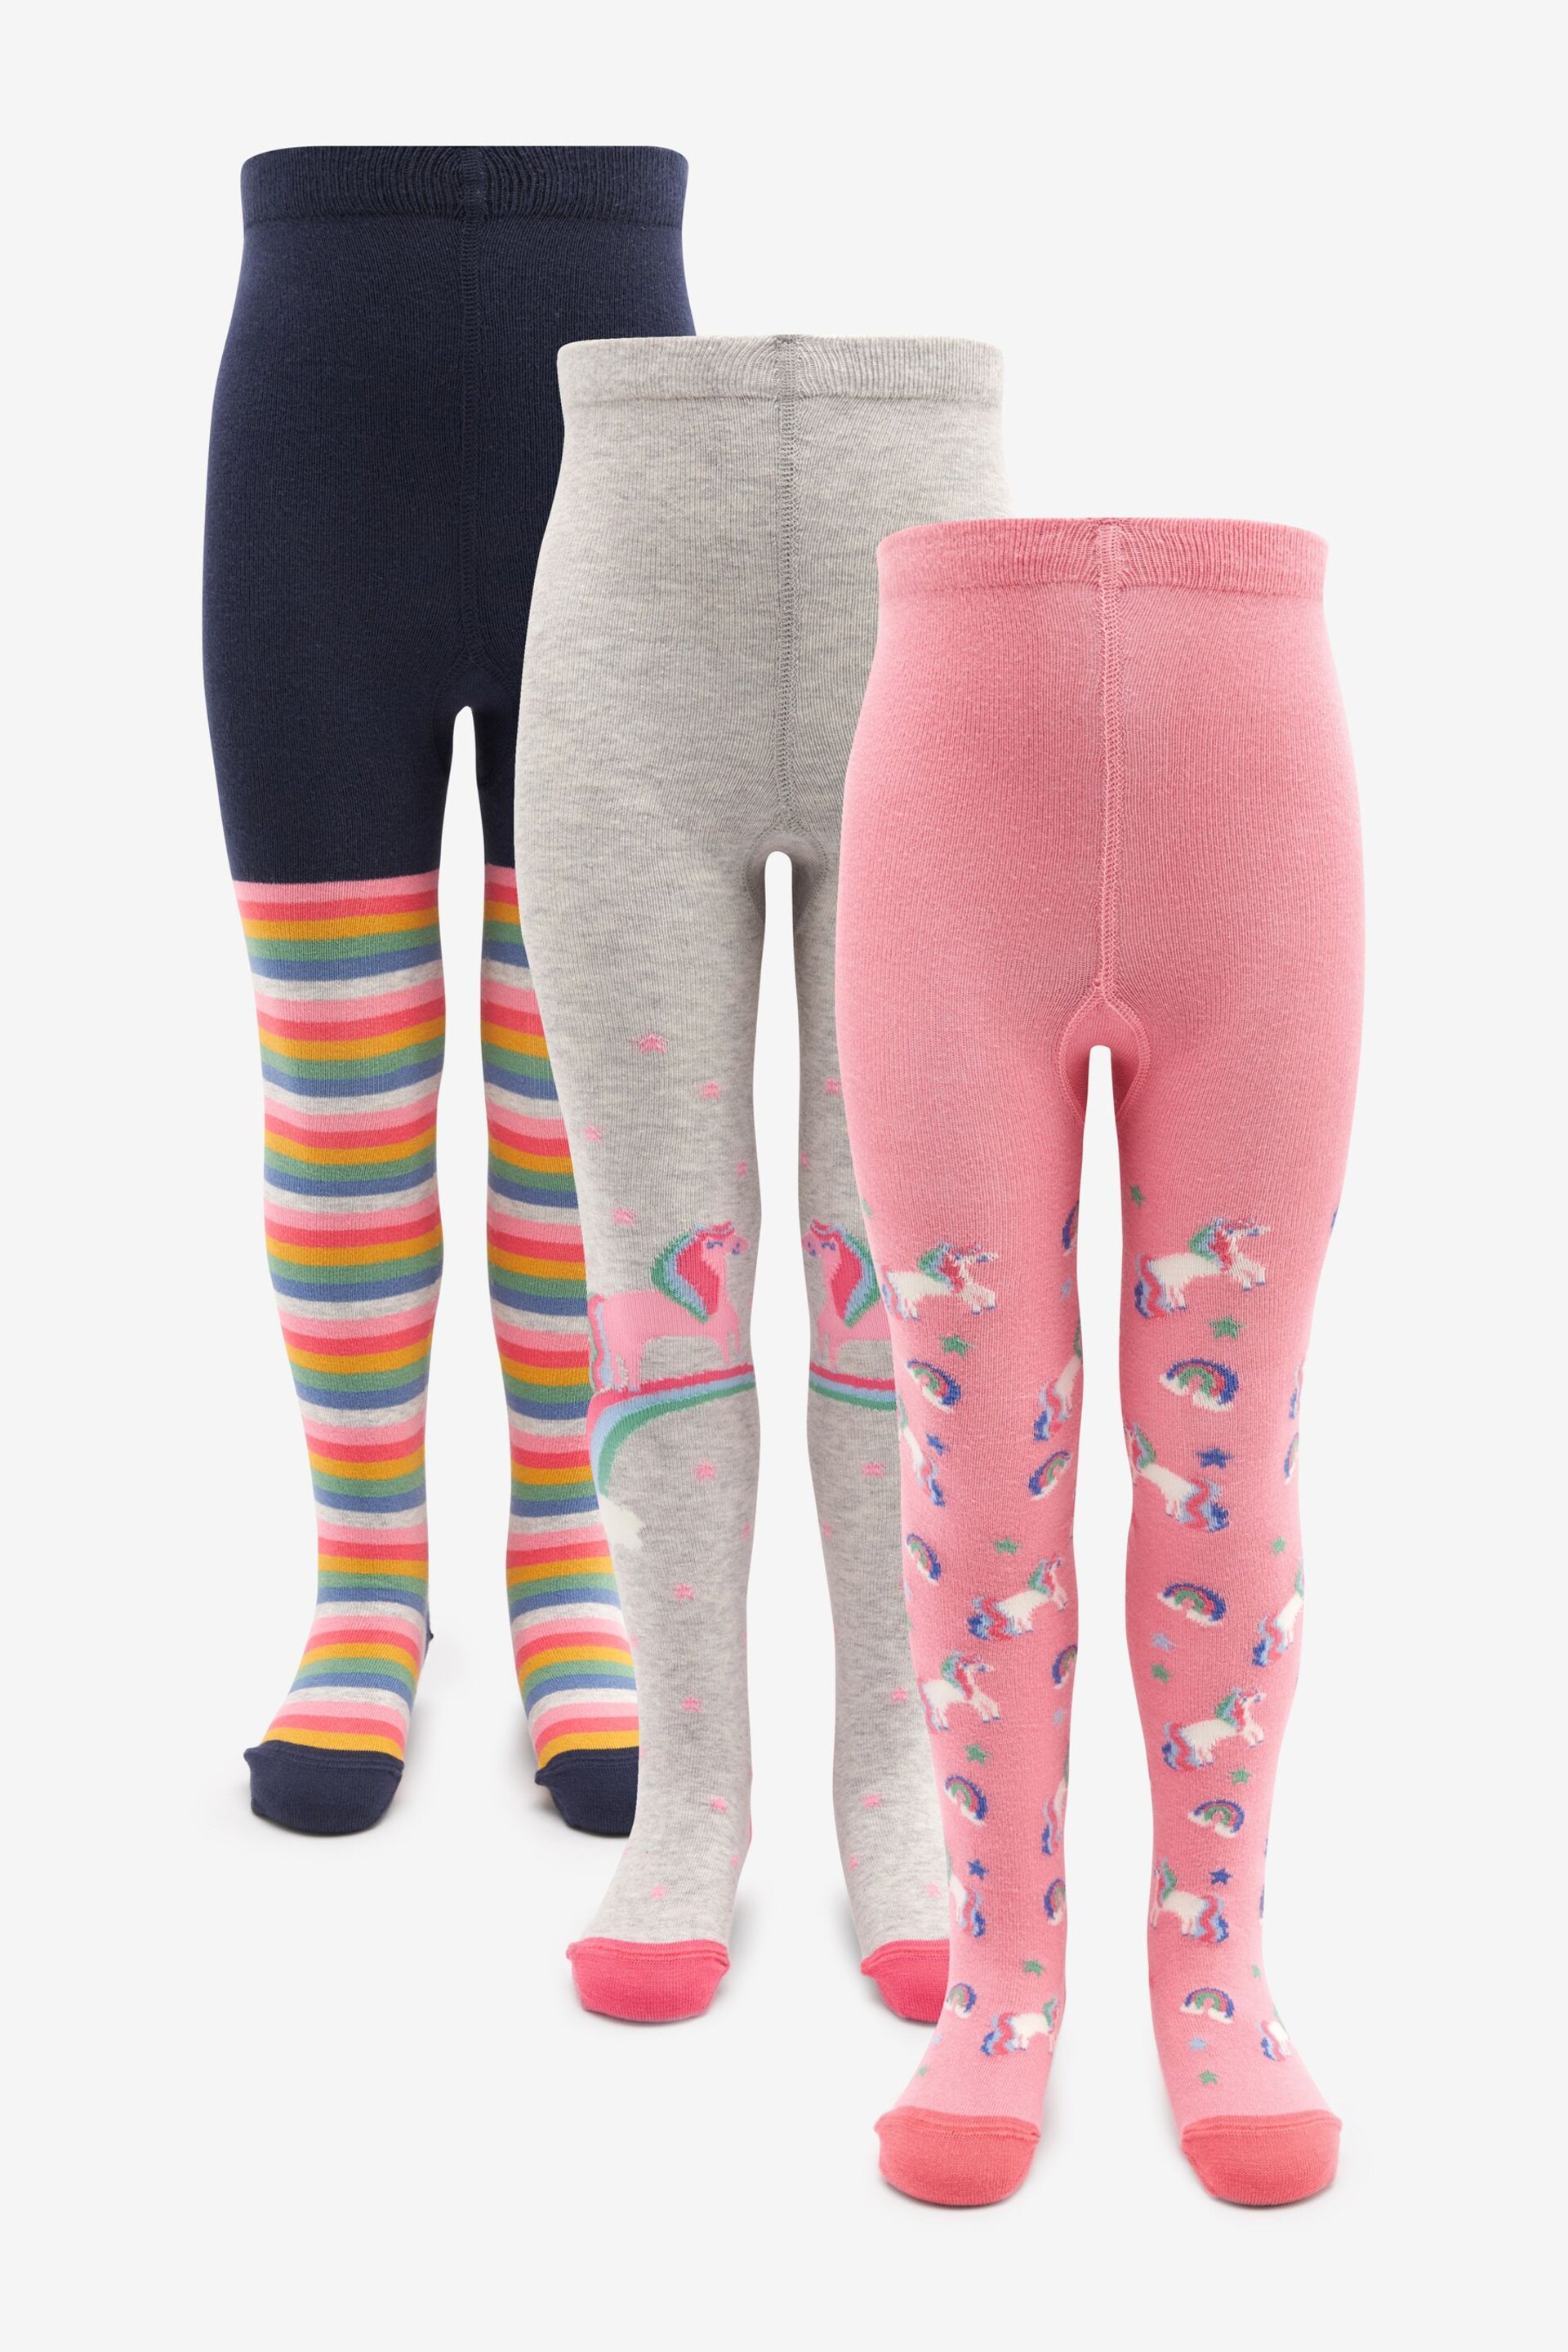 Blue, Pink and Grey 3 Pack Cotton Rich Unicorn Tights - Image 1 of 8